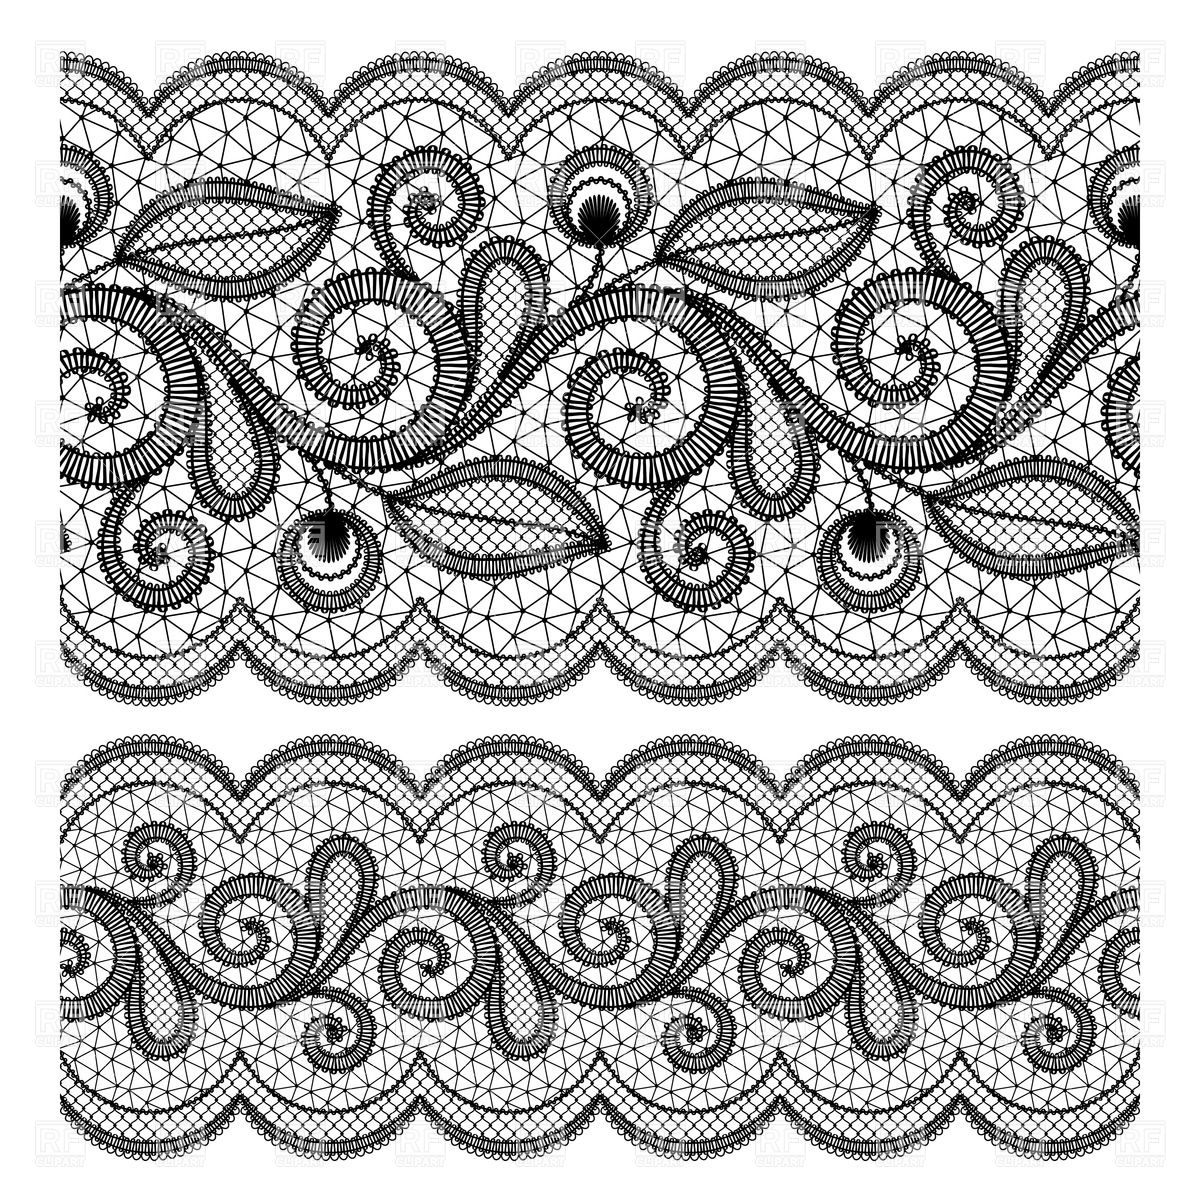 Black Lace Seamless Border Download Royalty Free Vector Clipart  Eps